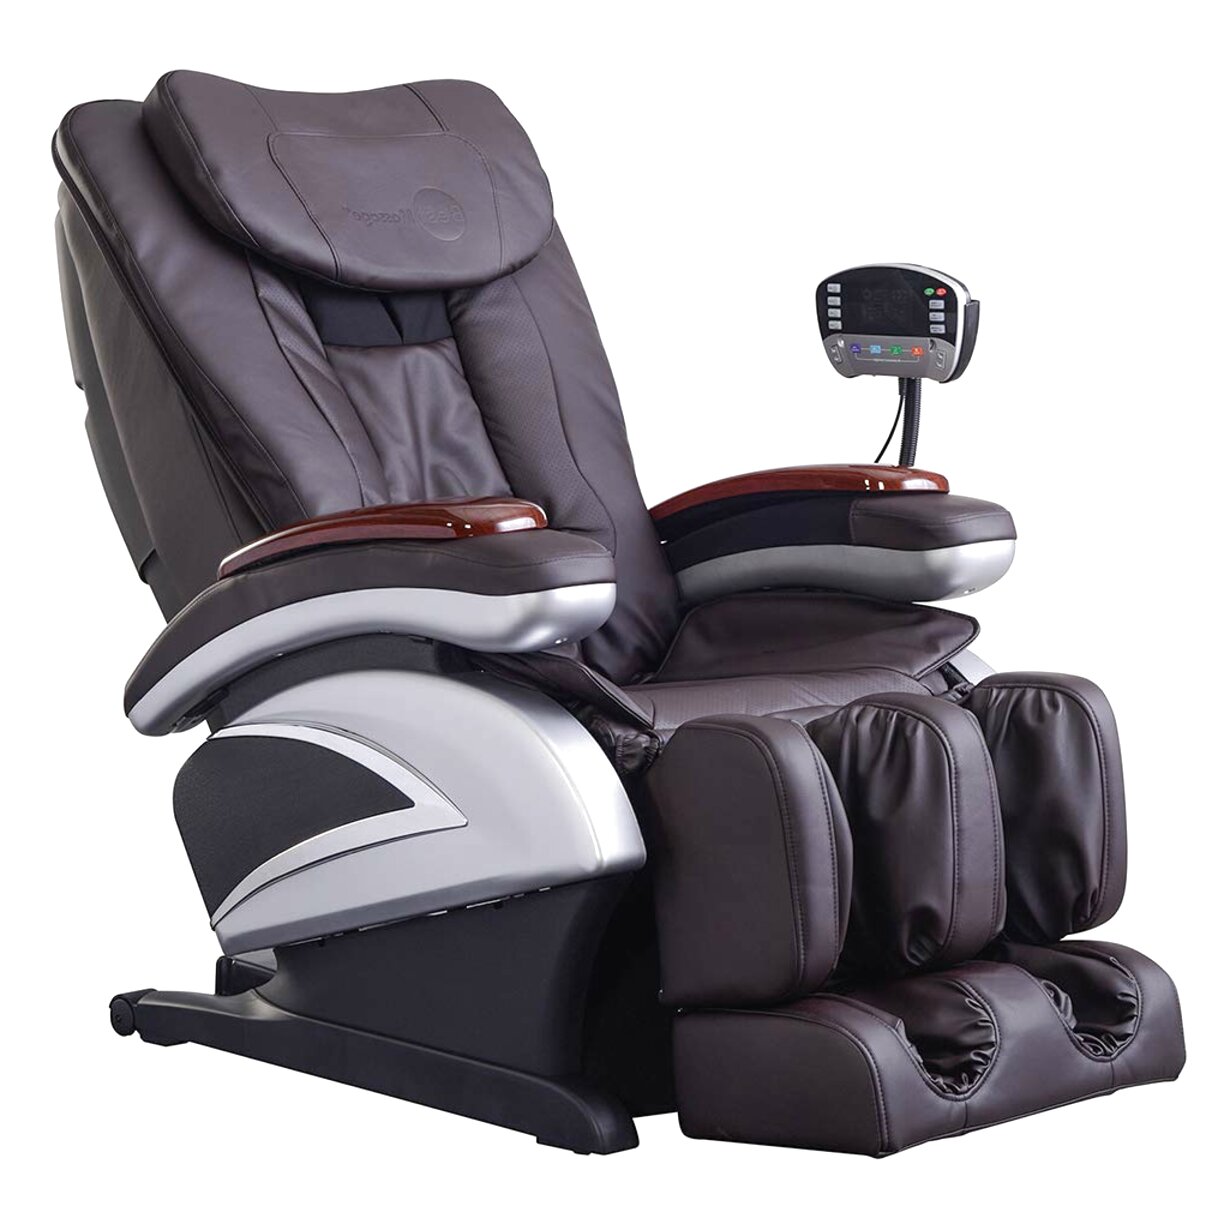 Electric Massage Chair For Sale In Uk 86 Used Electric Massage Chairs